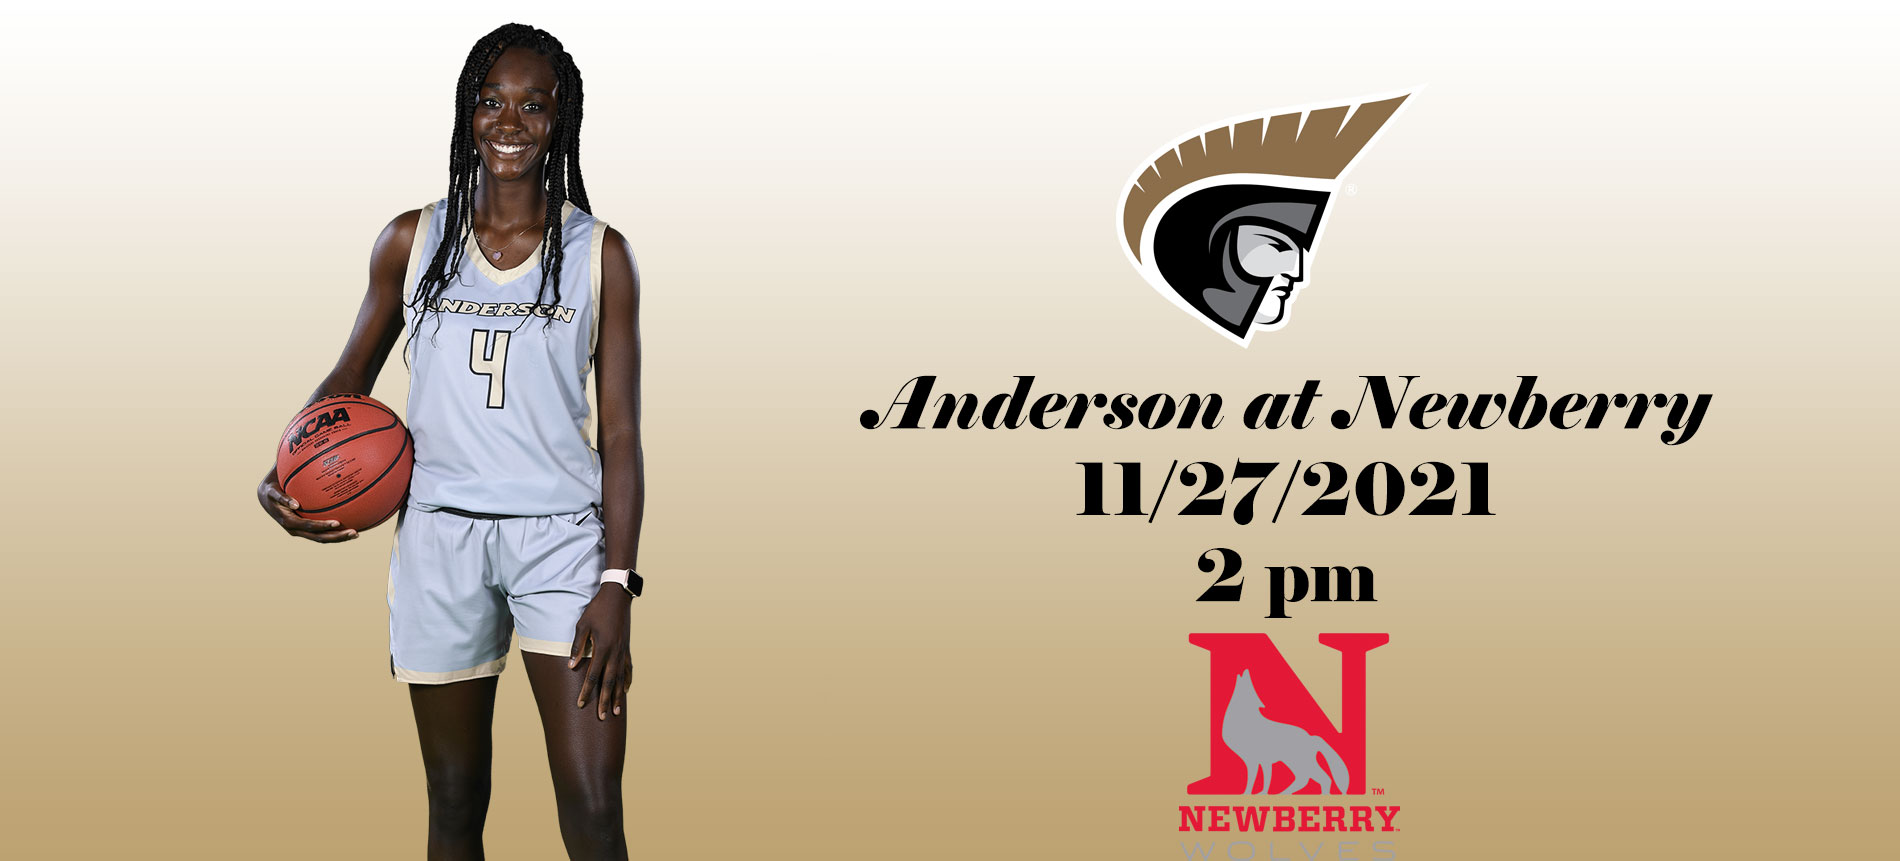 Women's Basketball Game Notes Released For Newberry